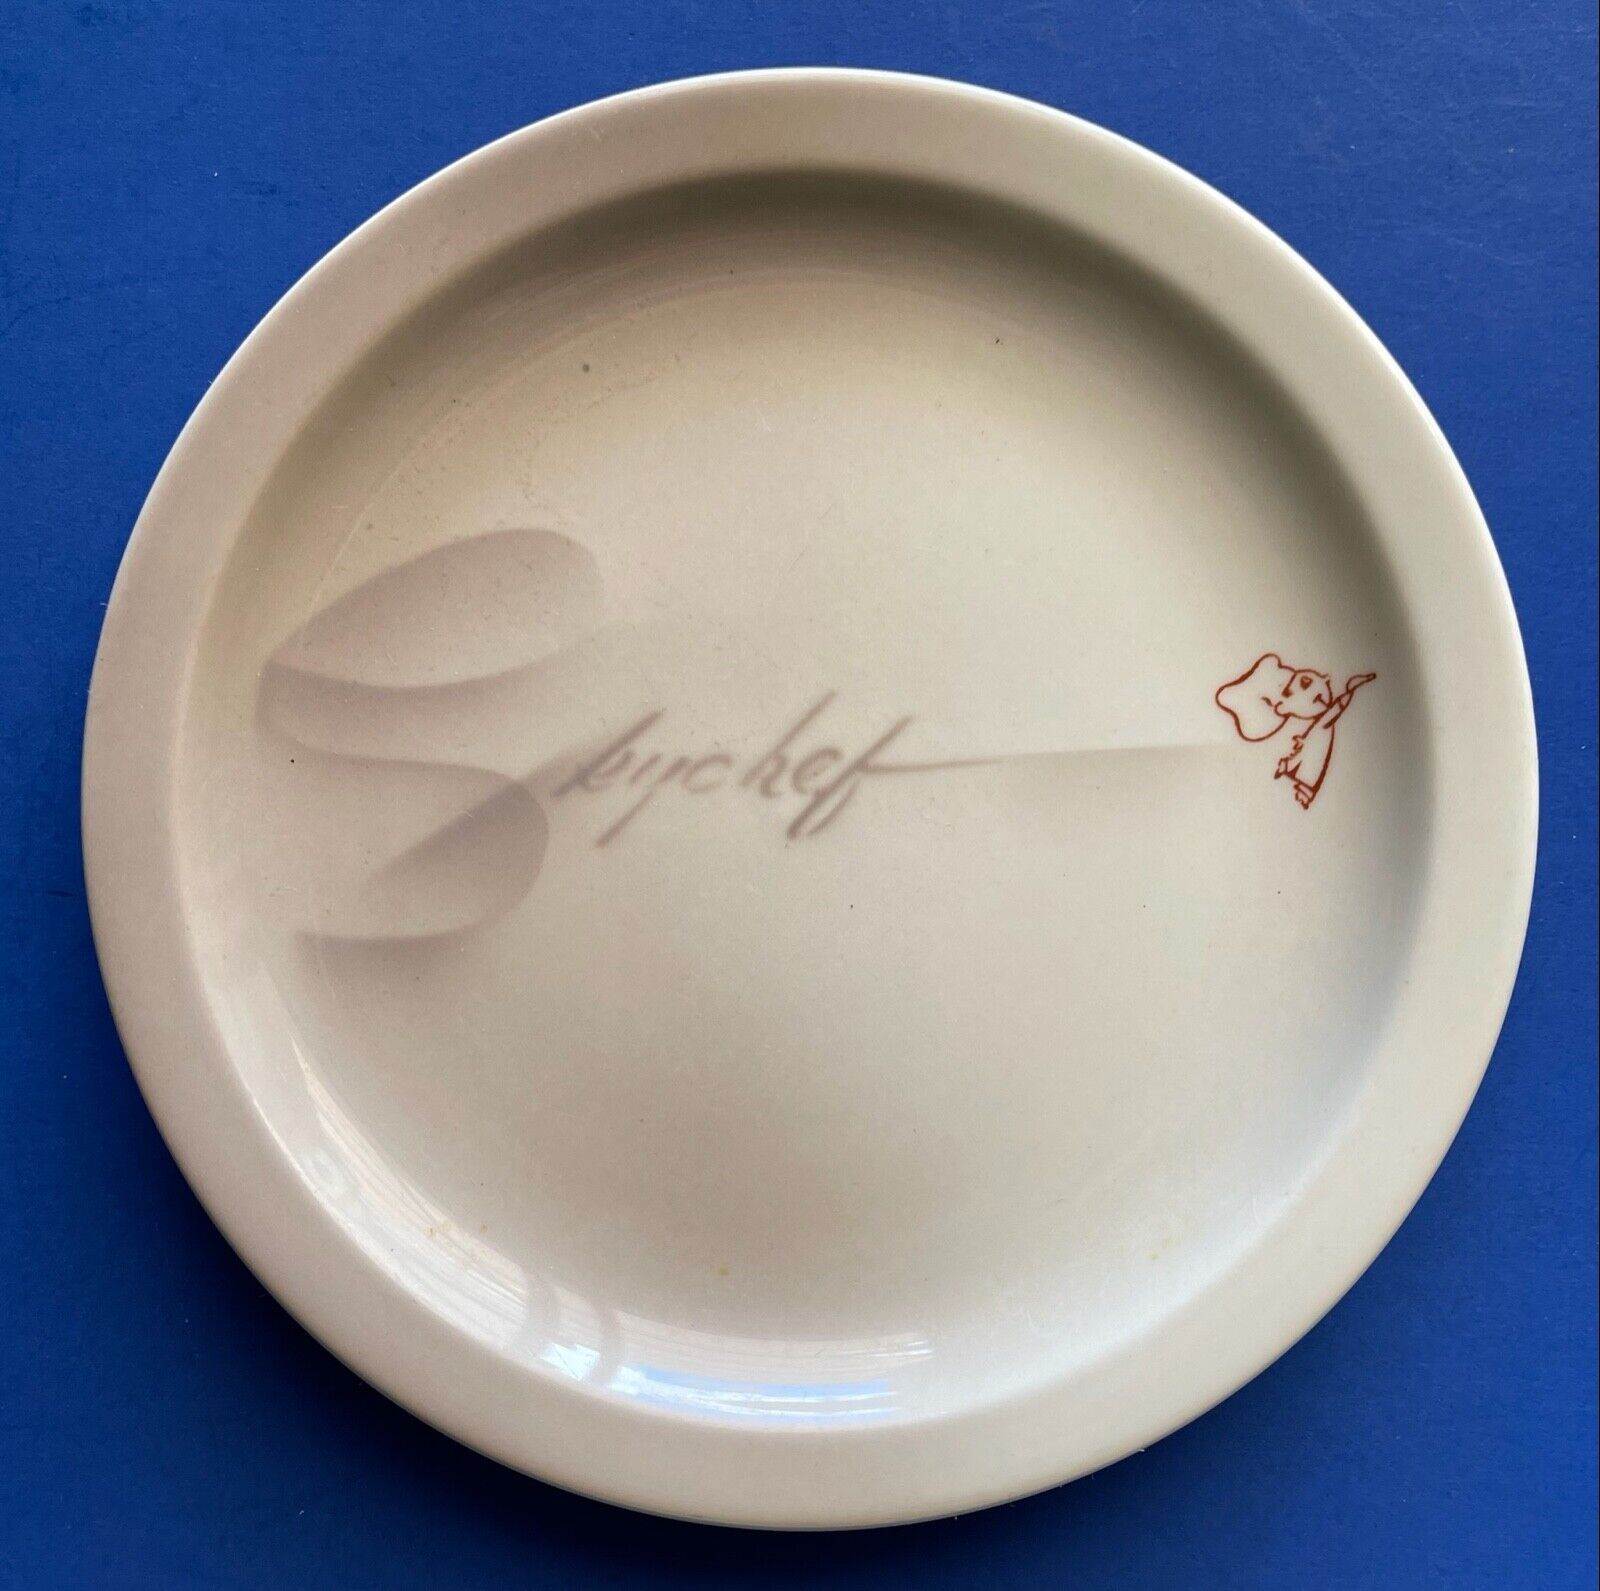 American Airlines Dinner Plate - Sky Chef Lounge by Syracuse China